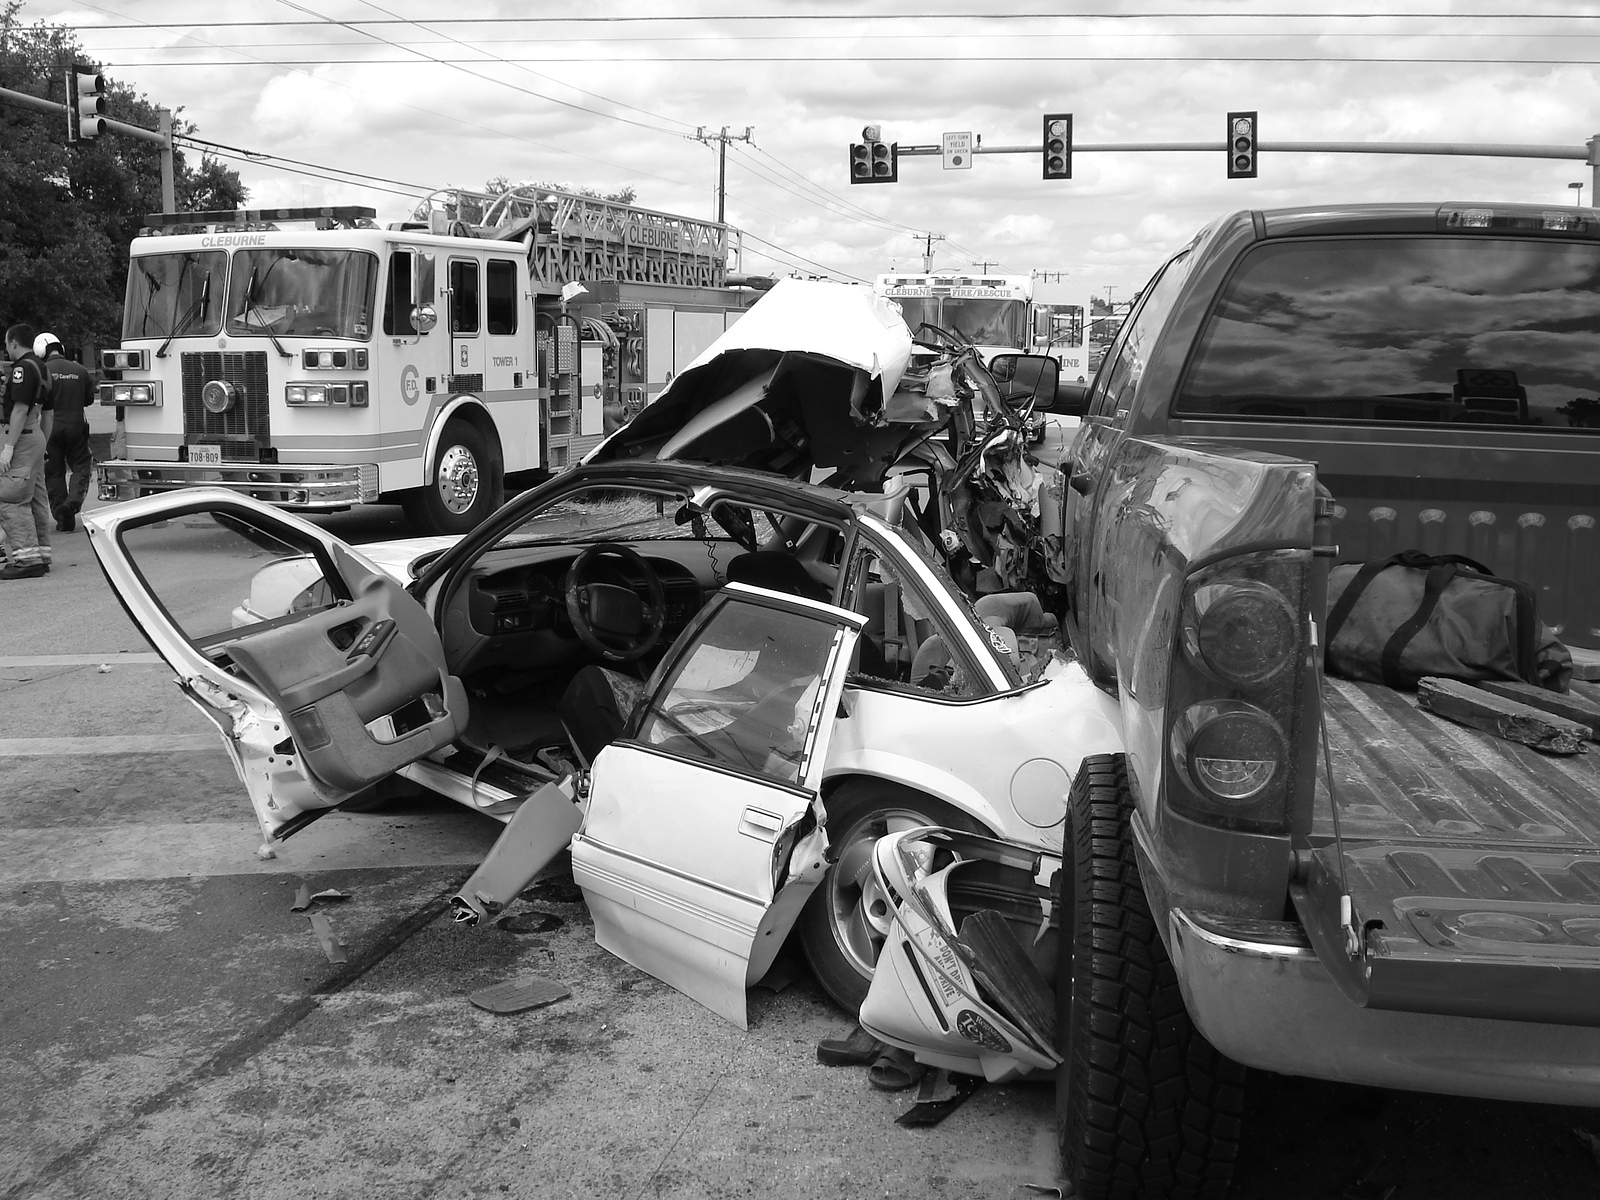 Car accident caused by a negligent driver in Woodbury - Woodbury Motor Vehicle Accident Attorneys - Minnesota